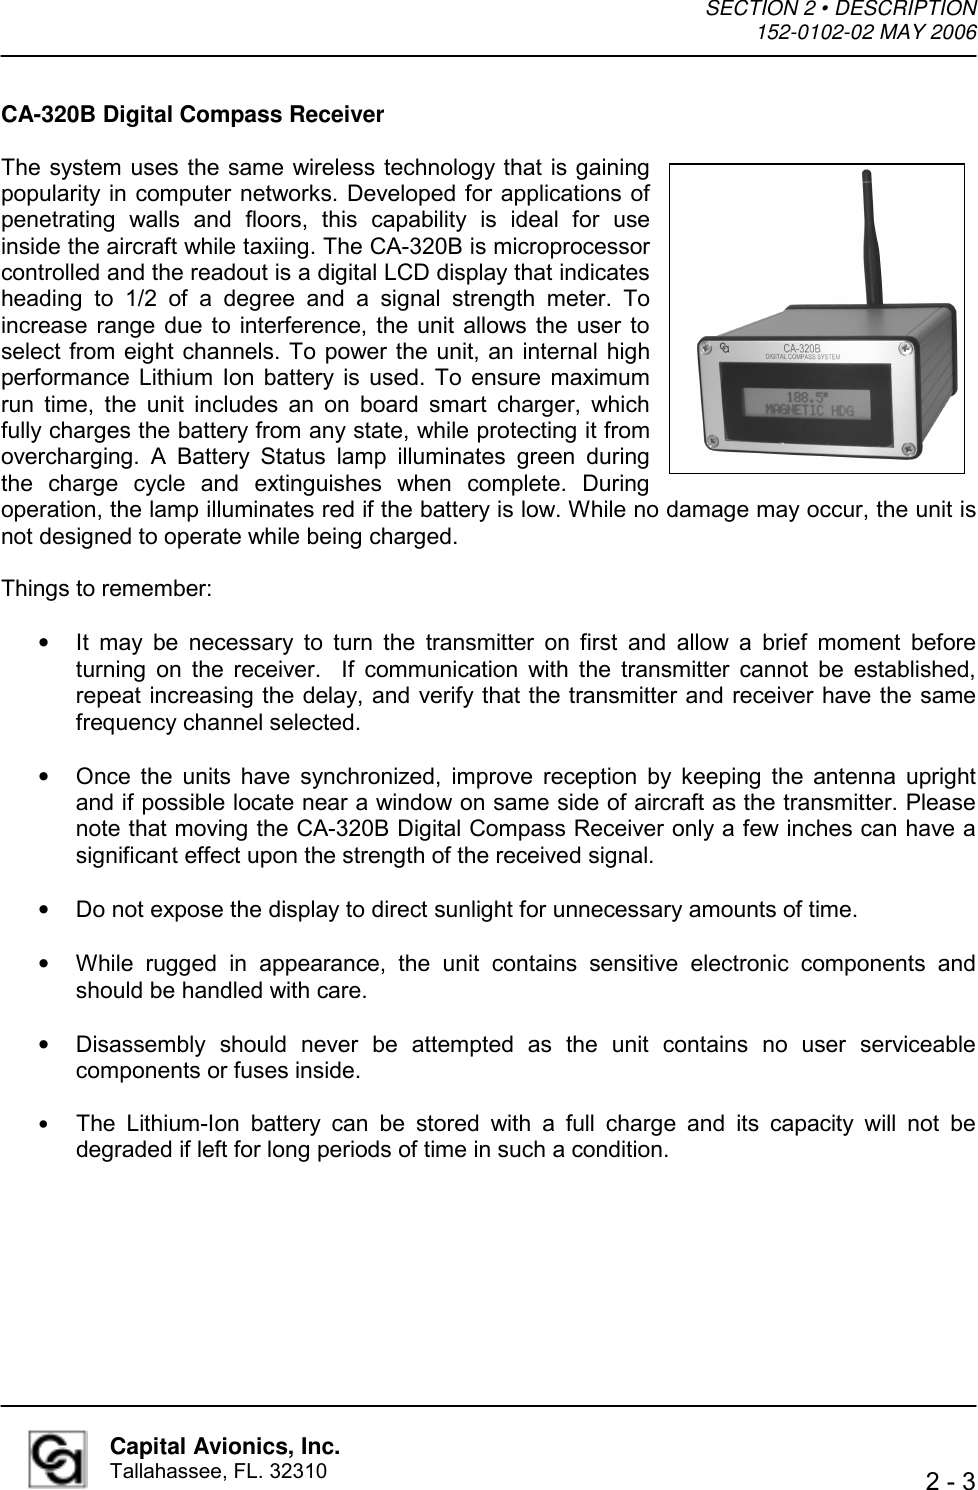 SECTION 2 • DESCRIPTION  152-0102-02 MAY 2006    2 - 3  Capital Avionics, Inc. Tallahassee, FL. 32310 CA-320B Digital Compass Receiver  The system uses the same wireless technology that is gaining popularity in computer networks. Developed for applications of penetrating walls and floors, this capability is ideal for use inside the aircraft while taxiing. The CA-320B is microprocessor controlled and the readout is a digital LCD display that indicates heading to 1/2 of a degree and a signal strength meter. To increase range due to interference, the unit allows the user to select from eight channels. To power the unit, an internal high performance Lithium Ion battery is used. To ensure maximum run time, the unit includes an on board smart charger, which fully charges the battery from any state, while protecting it from overcharging. A Battery Status lamp illuminates green during the charge cycle and extinguishes when complete. During operation, the lamp illuminates red if the battery is low. While no damage may occur, the unit is not designed to operate while being charged.   Things to remember:  •  It may be necessary to turn the transmitter on first and allow a brief moment before turning on the receiver.  If communication with the transmitter cannot be established, repeat increasing the delay, and verify that the transmitter and receiver have the same frequency channel selected.  •  Once the units have synchronized, improve reception by keeping the antenna upright and if possible locate near a window on same side of aircraft as the transmitter. Please note that moving the CA-320B Digital Compass Receiver only a few inches can have a significant effect upon the strength of the received signal.  •  Do not expose the display to direct sunlight for unnecessary amounts of time.  •  While rugged in appearance, the unit contains sensitive electronic components and should be handled with care.  •  Disassembly should never be attempted as the unit contains no user serviceable components or fuses inside.  •  The Lithium-Ion battery can be stored with a full charge and its capacity will not be degraded if left for long periods of time in such a condition. 